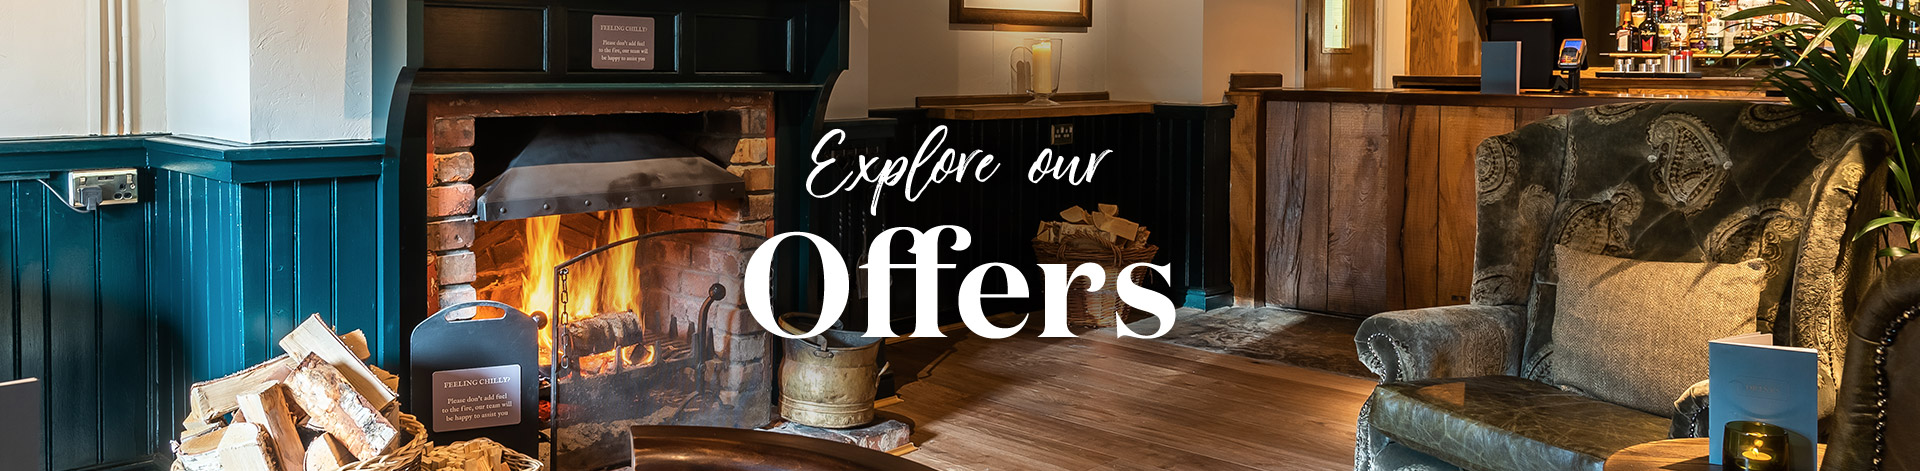 Our latest offers at The Marsh Harrier